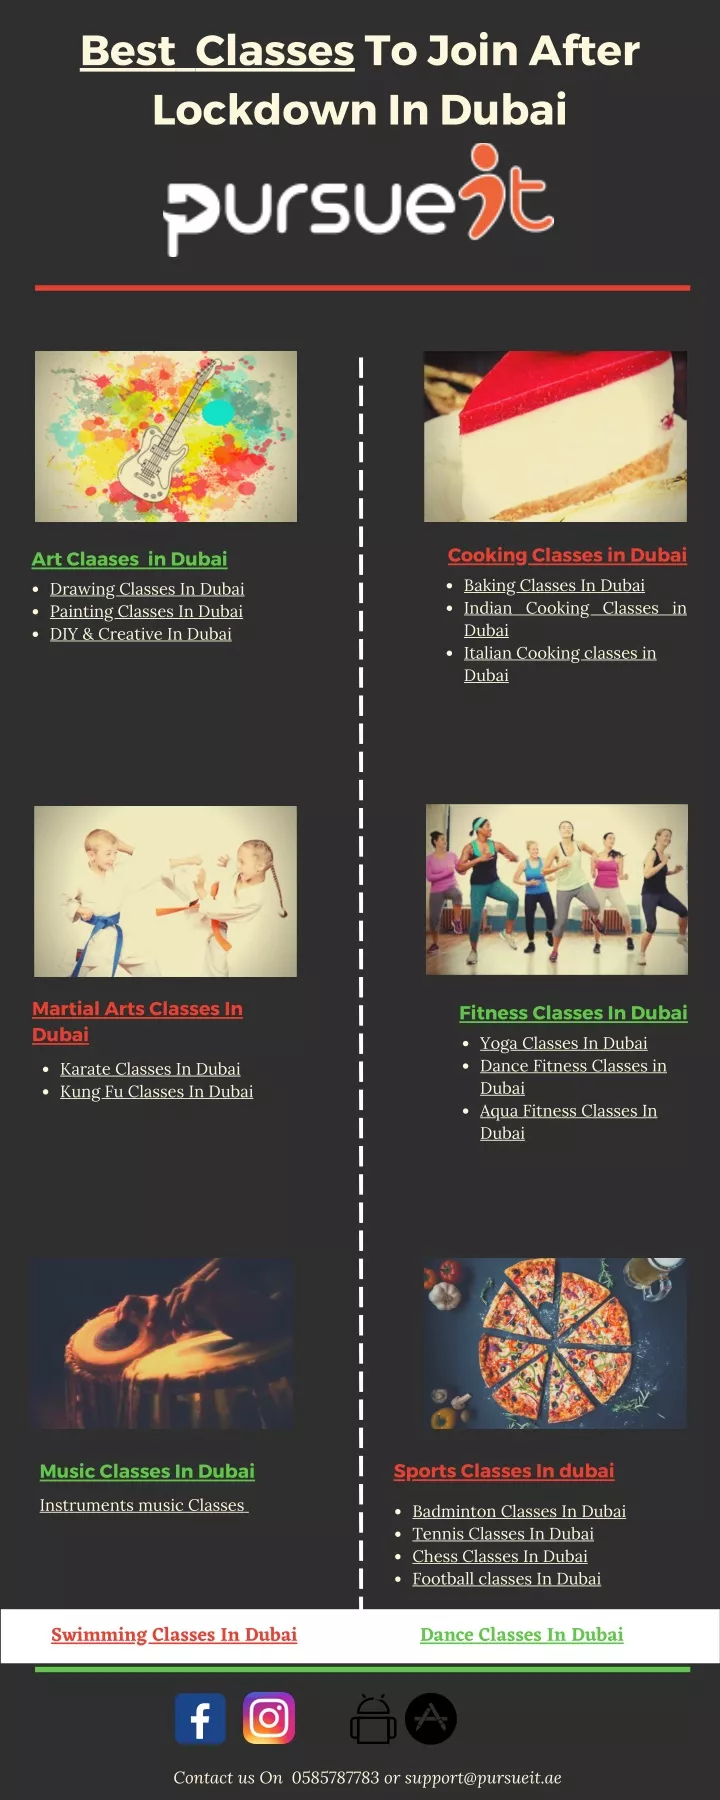 best classes to join after lockdown in dubai